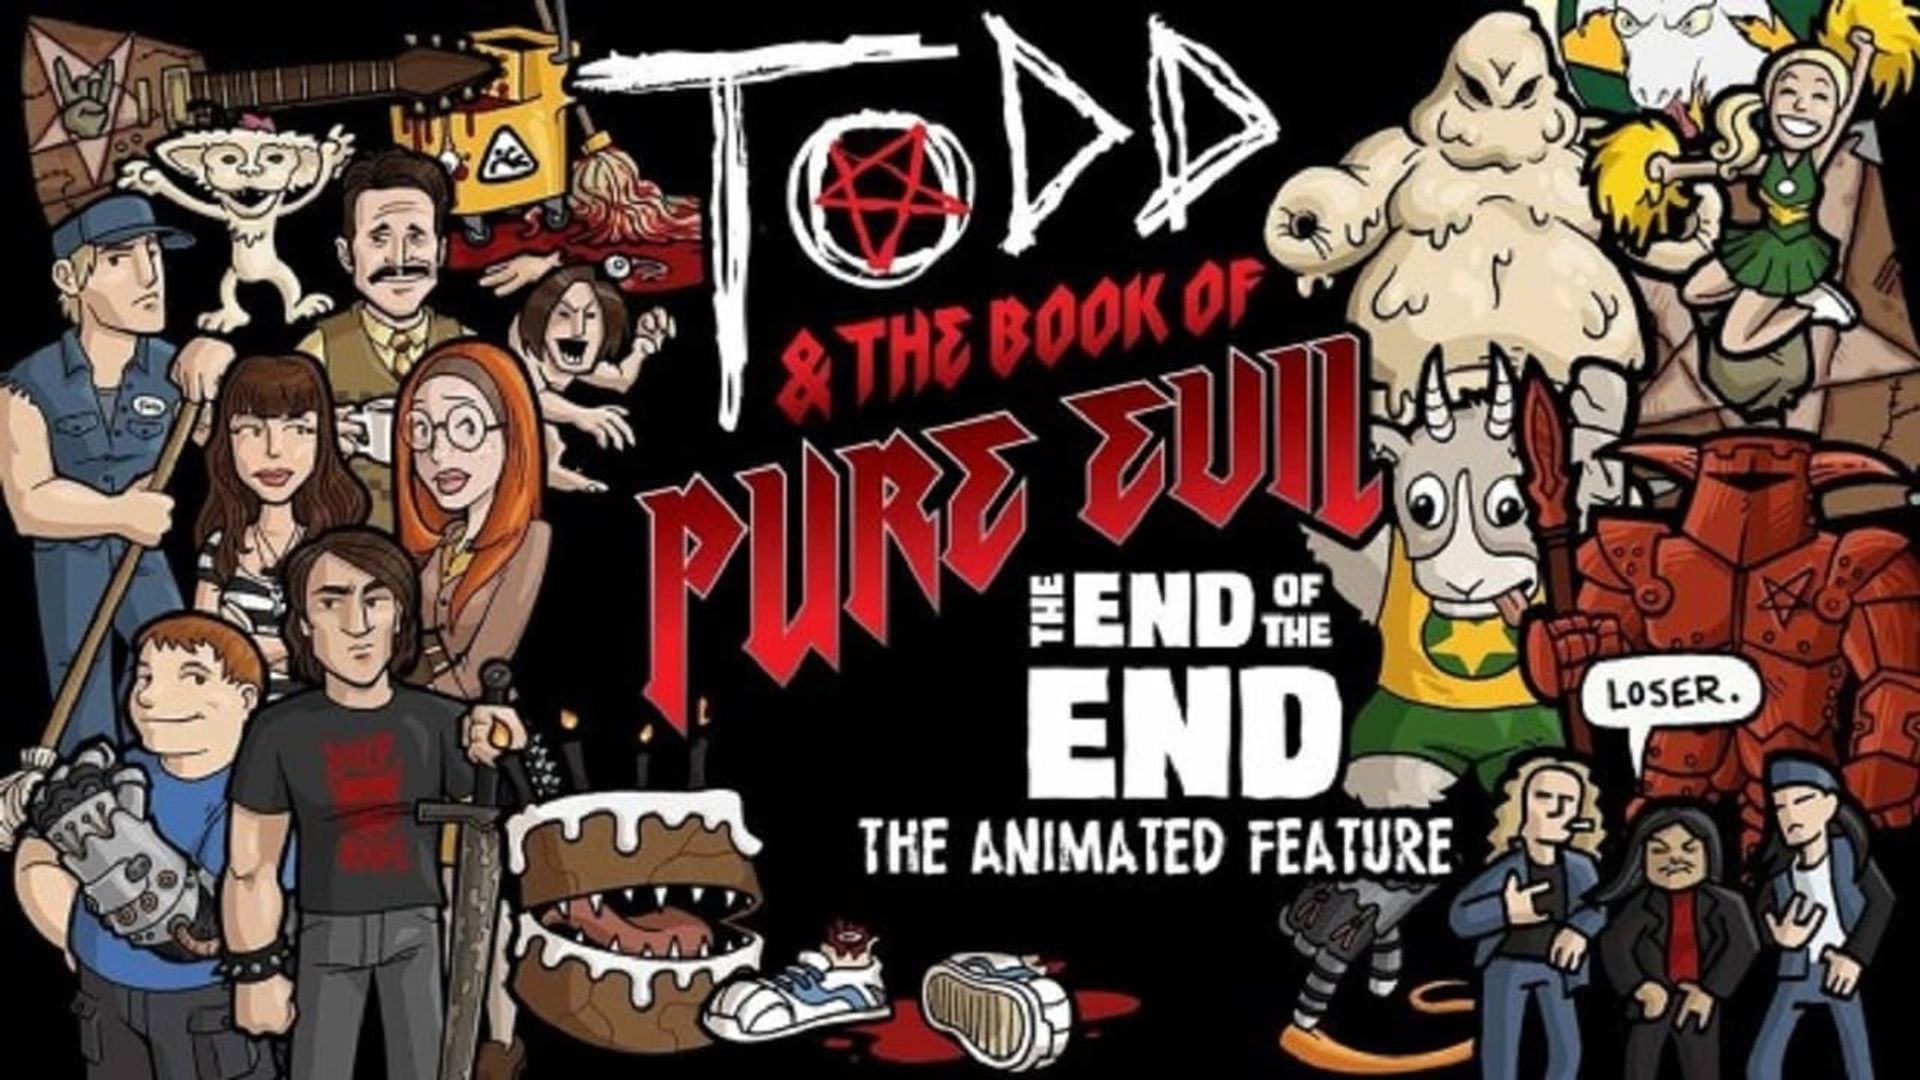 Todd and the Book of Pure Evil: The End of the End background